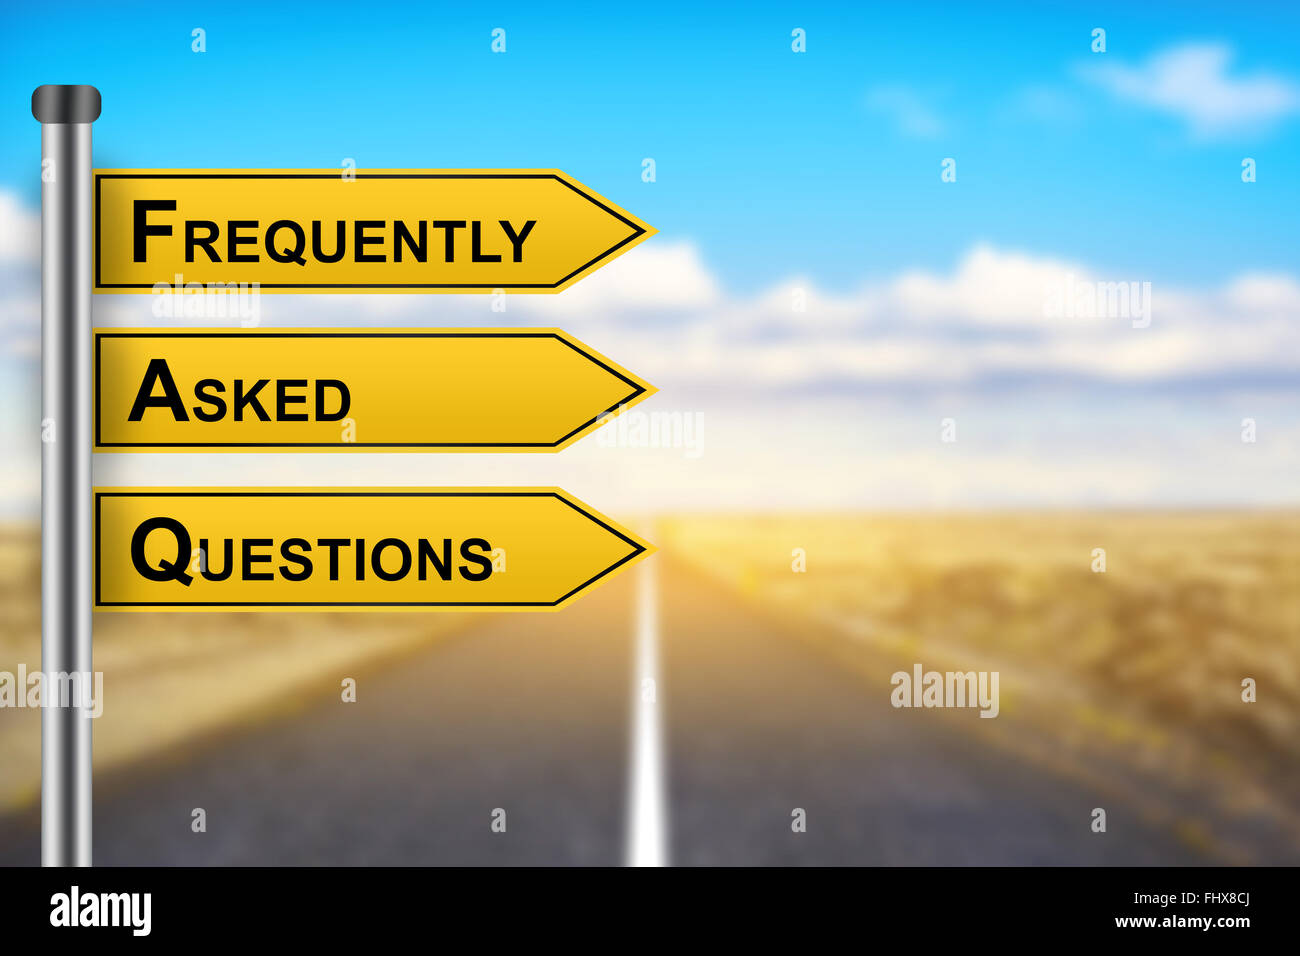 FAQ or Frequently asked questions words on yellow road sign with blurred background Stock Photo